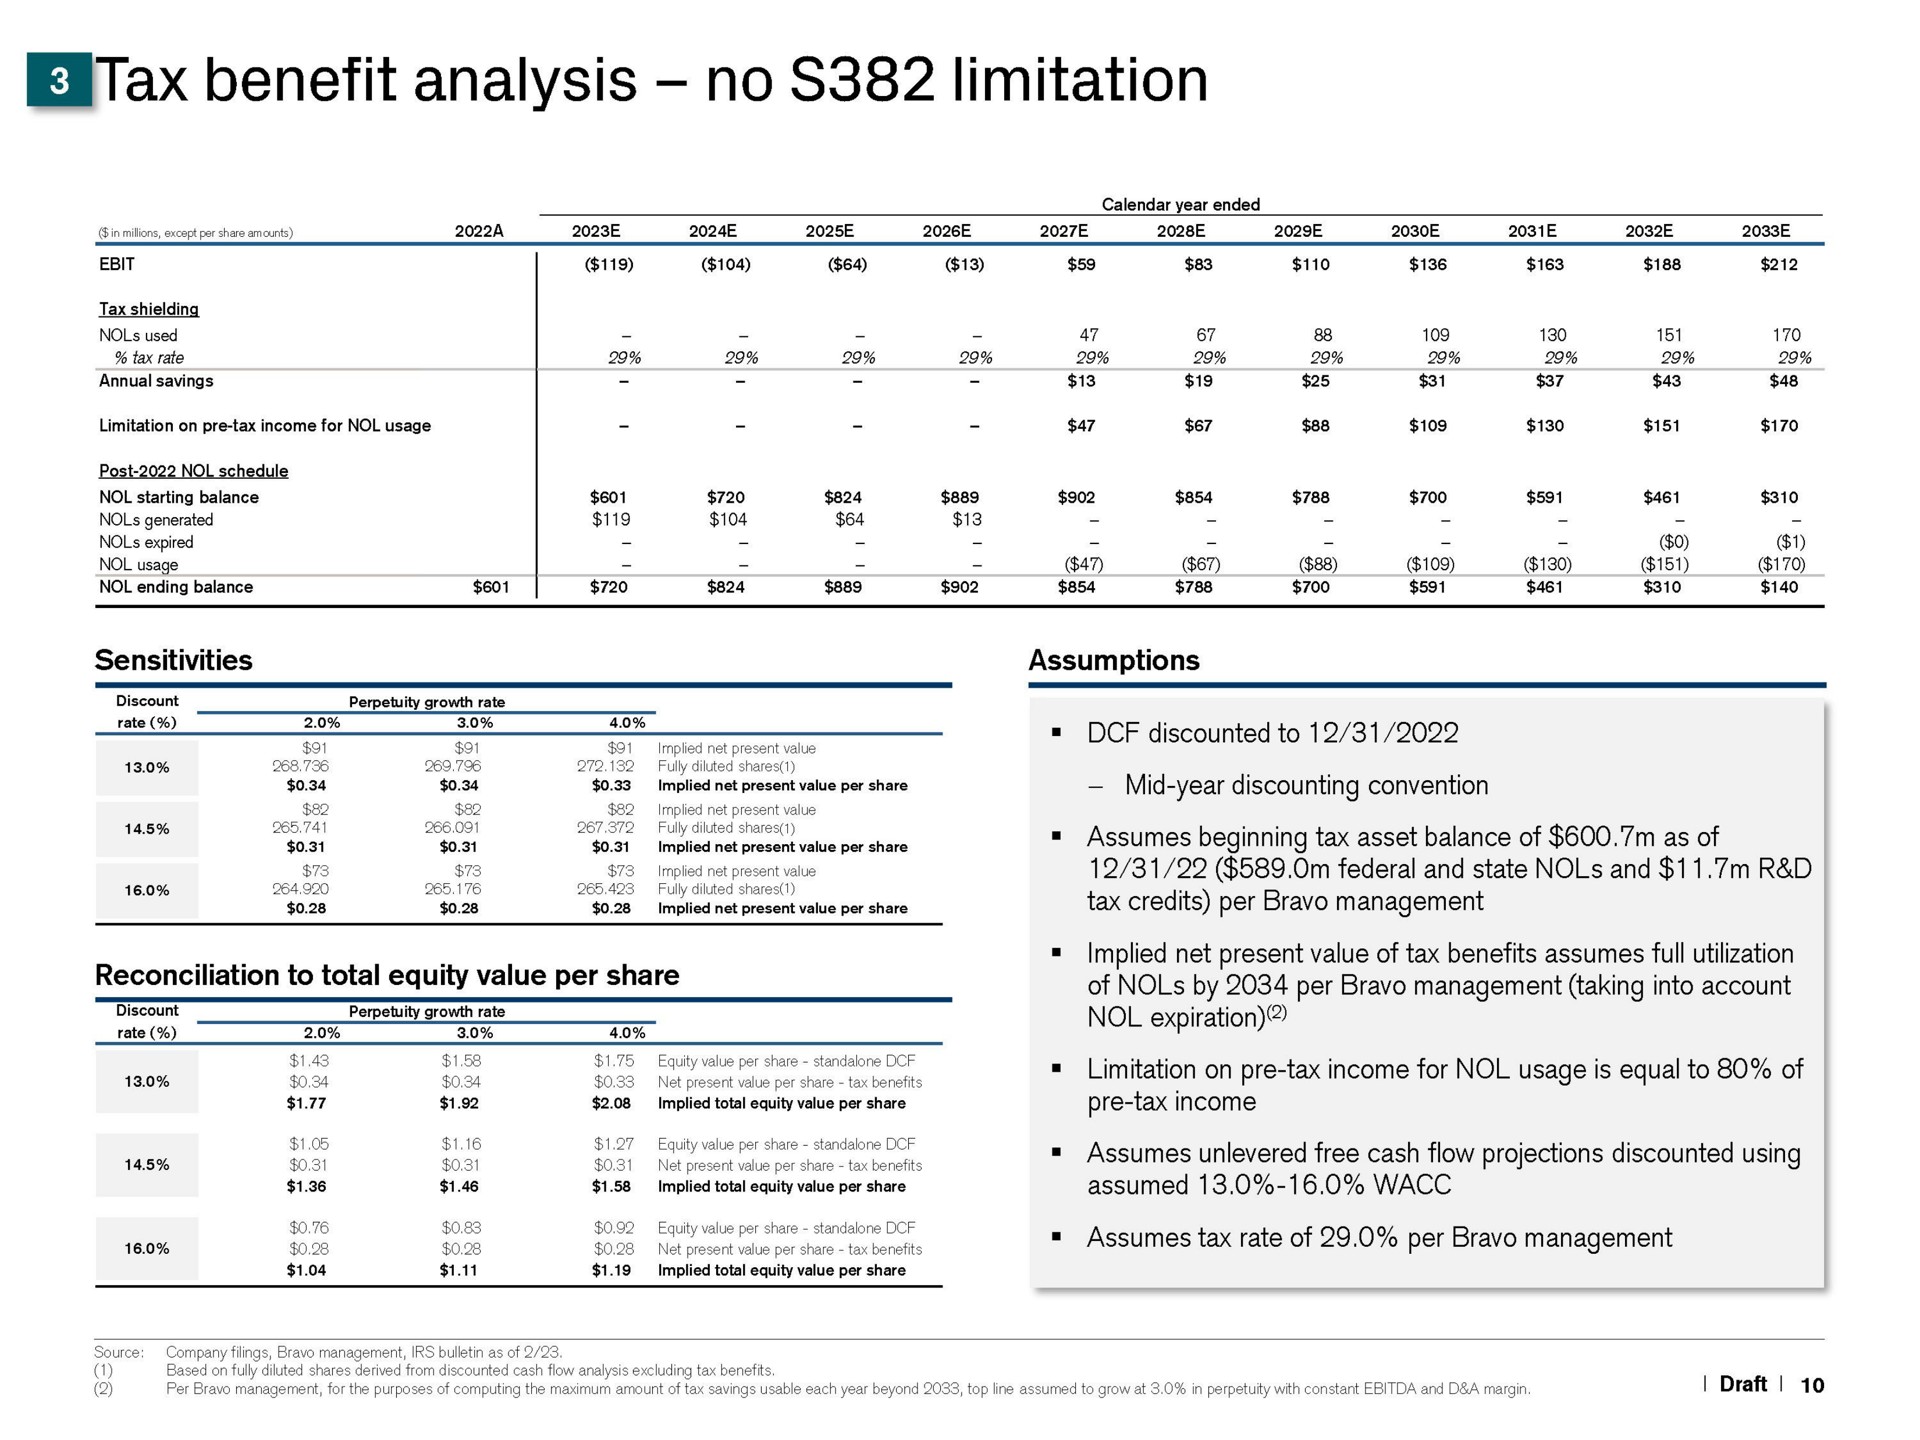 benefit analysis no limitation sensitivities reconciliation to total equity value per share mid year discounting convention assumes beginning tax asset balance of as of tax credits per bravo management of by per bravo management taking into account | Credit Suisse